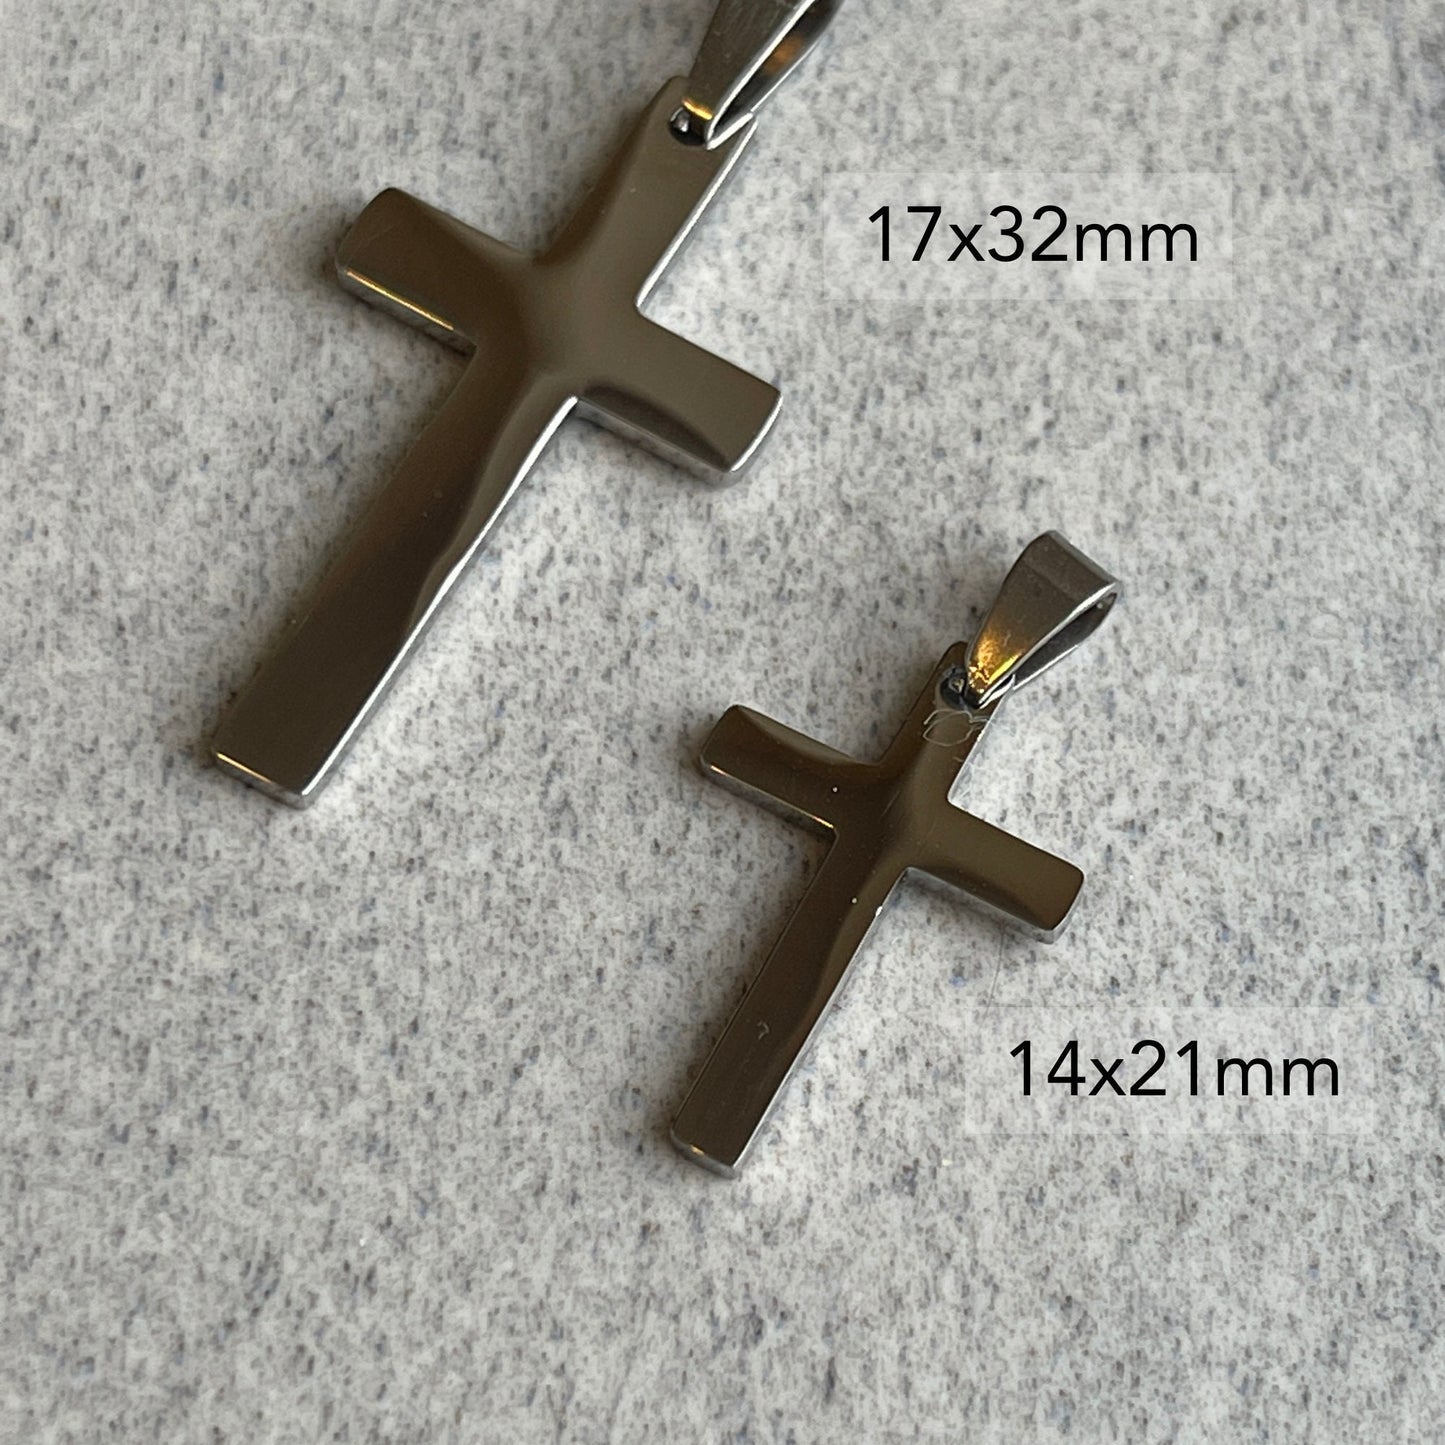 Stainless Steel Cross Necklace for Men